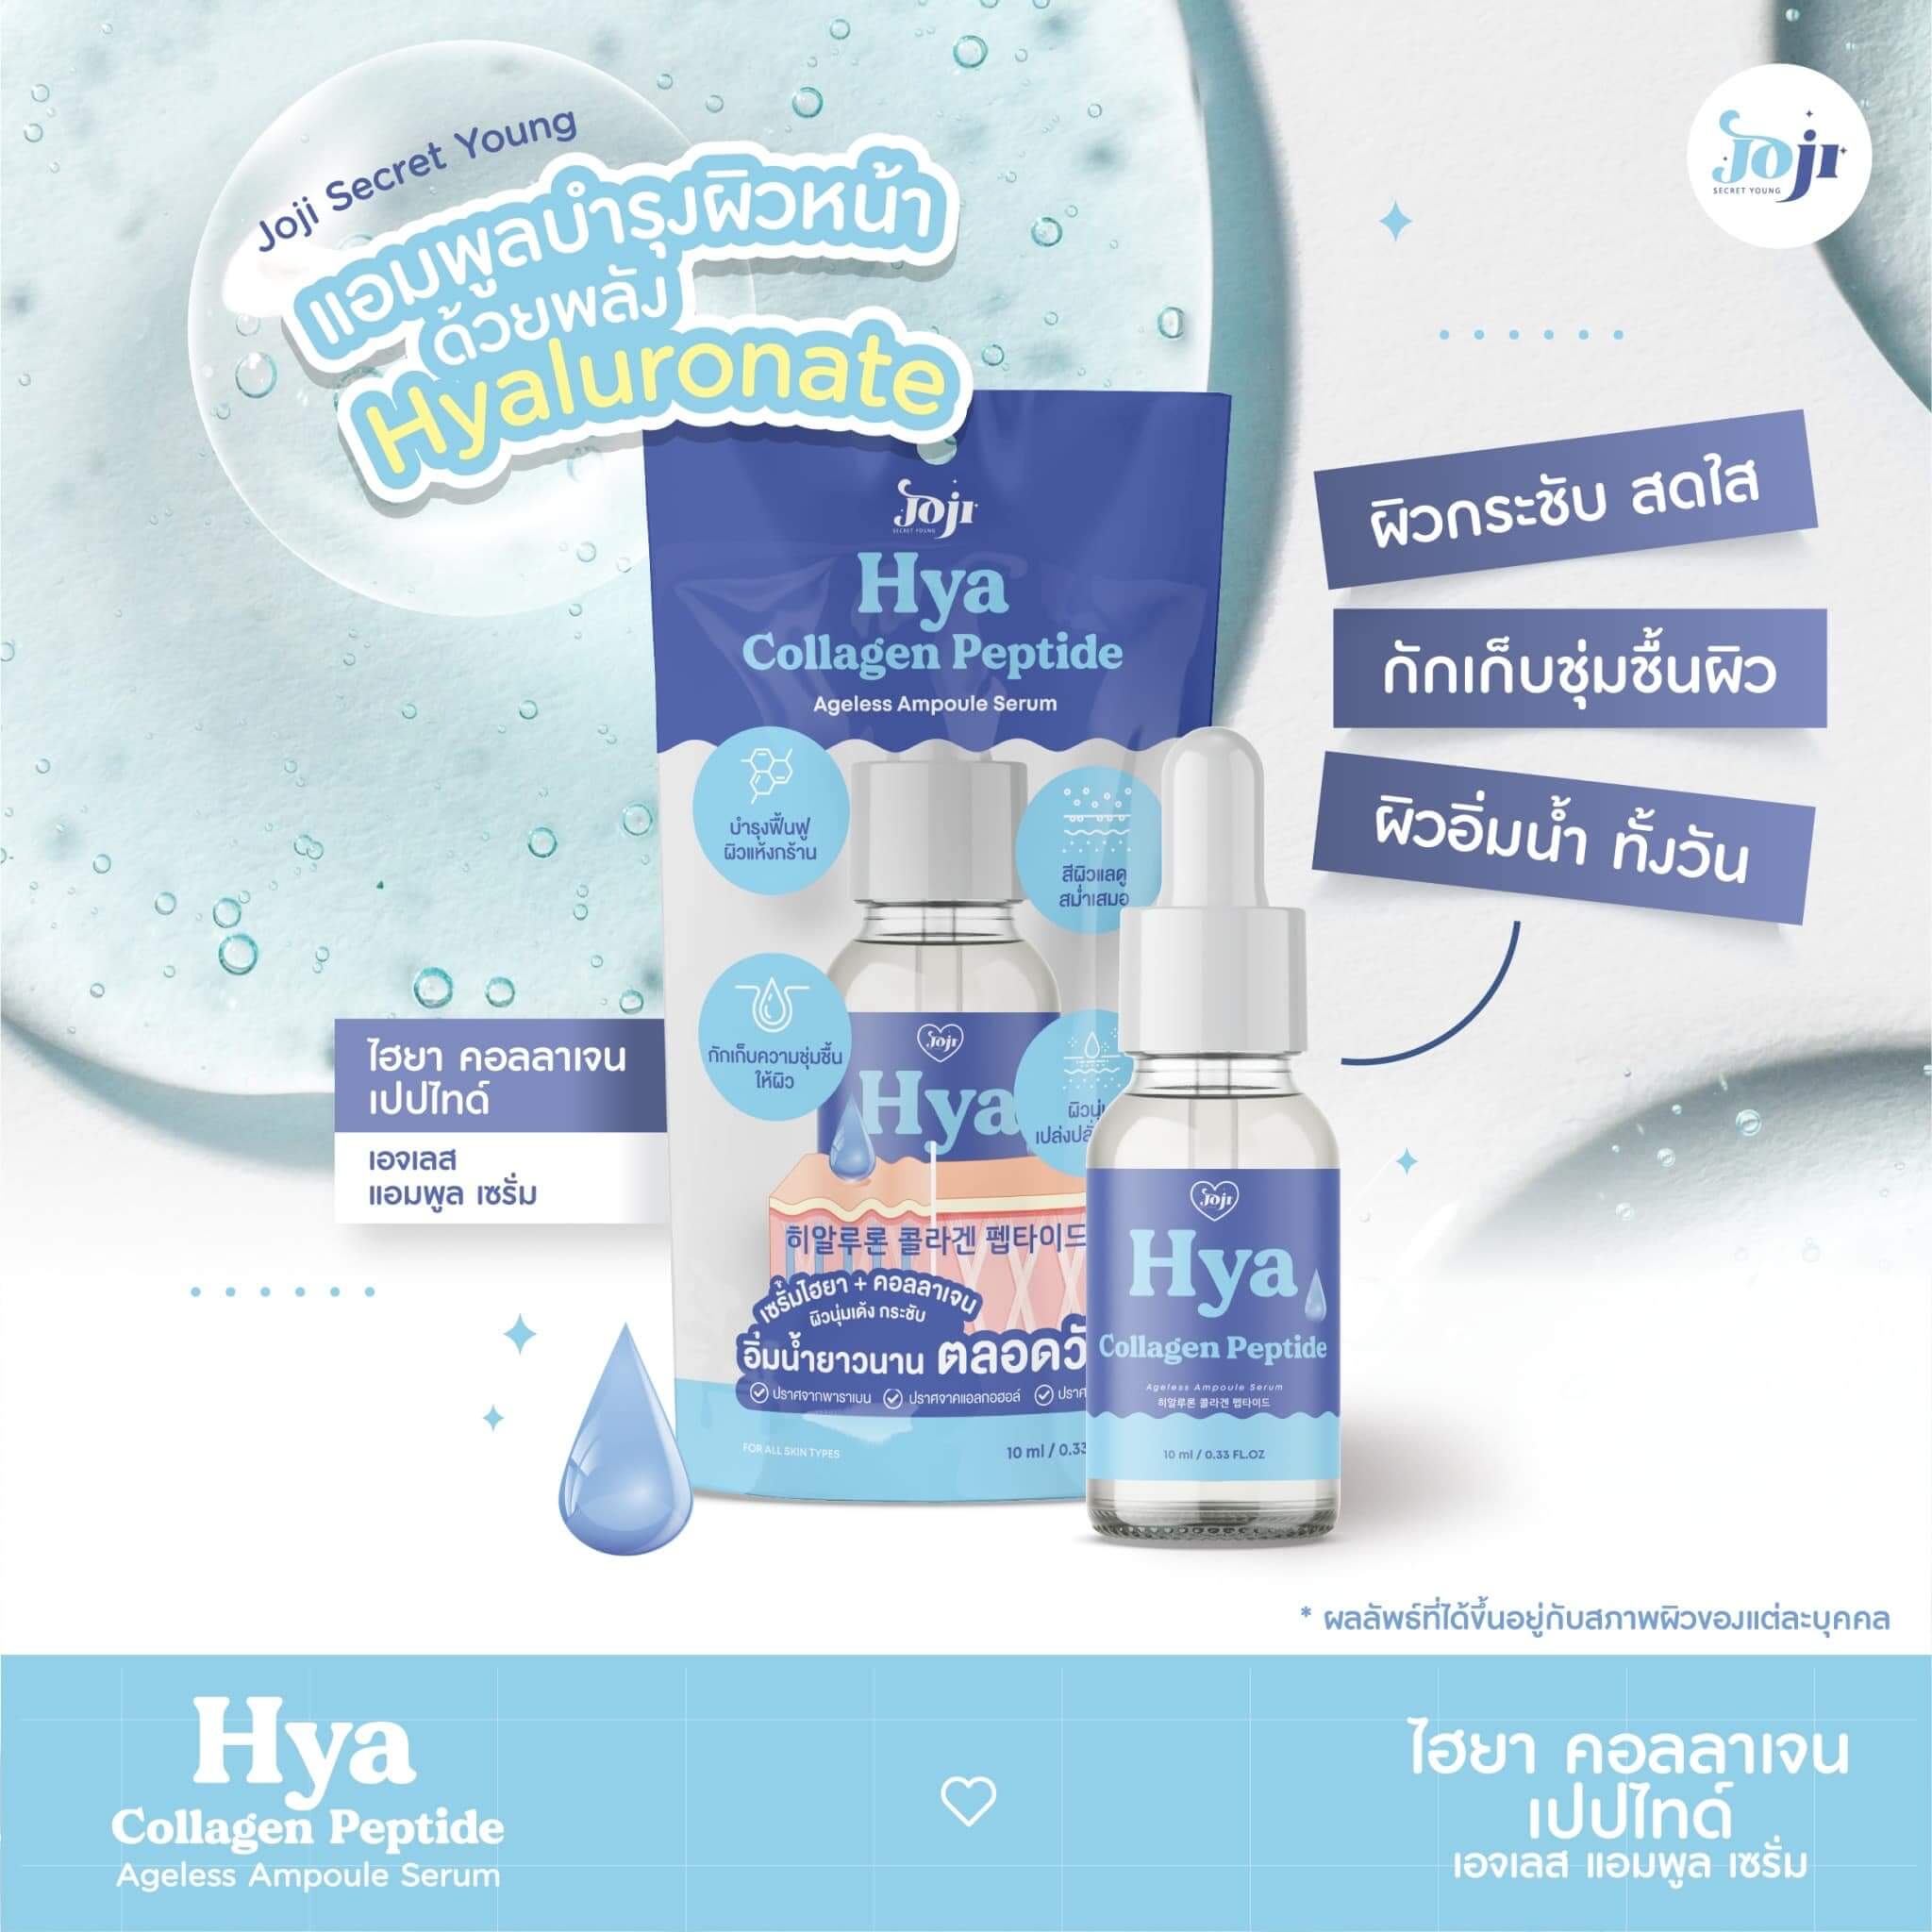 Hya collagen Peptide Ageless Ampoute Serum, Ampoute Serum, เซรั่ม,ซีรั่ม,Hya collagen Peptide Ageless, collagen,คอลลาเจน